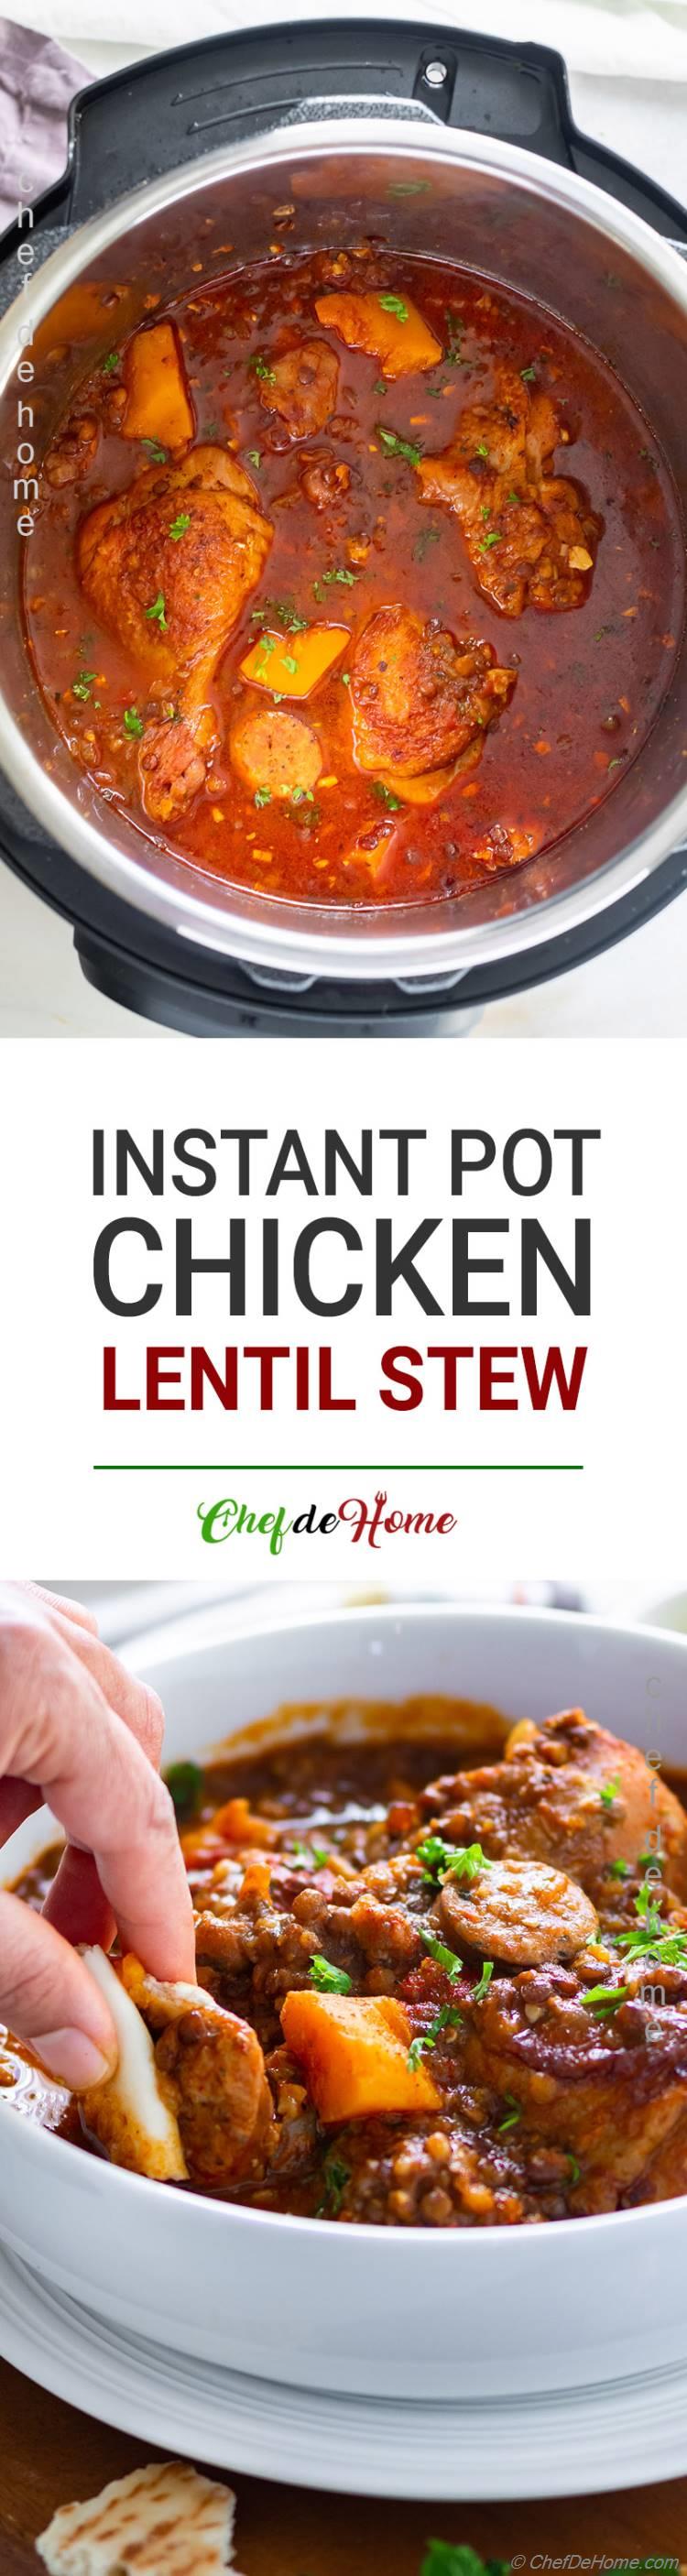 Chicken and Lentils Stew Prepared in Instant Pot